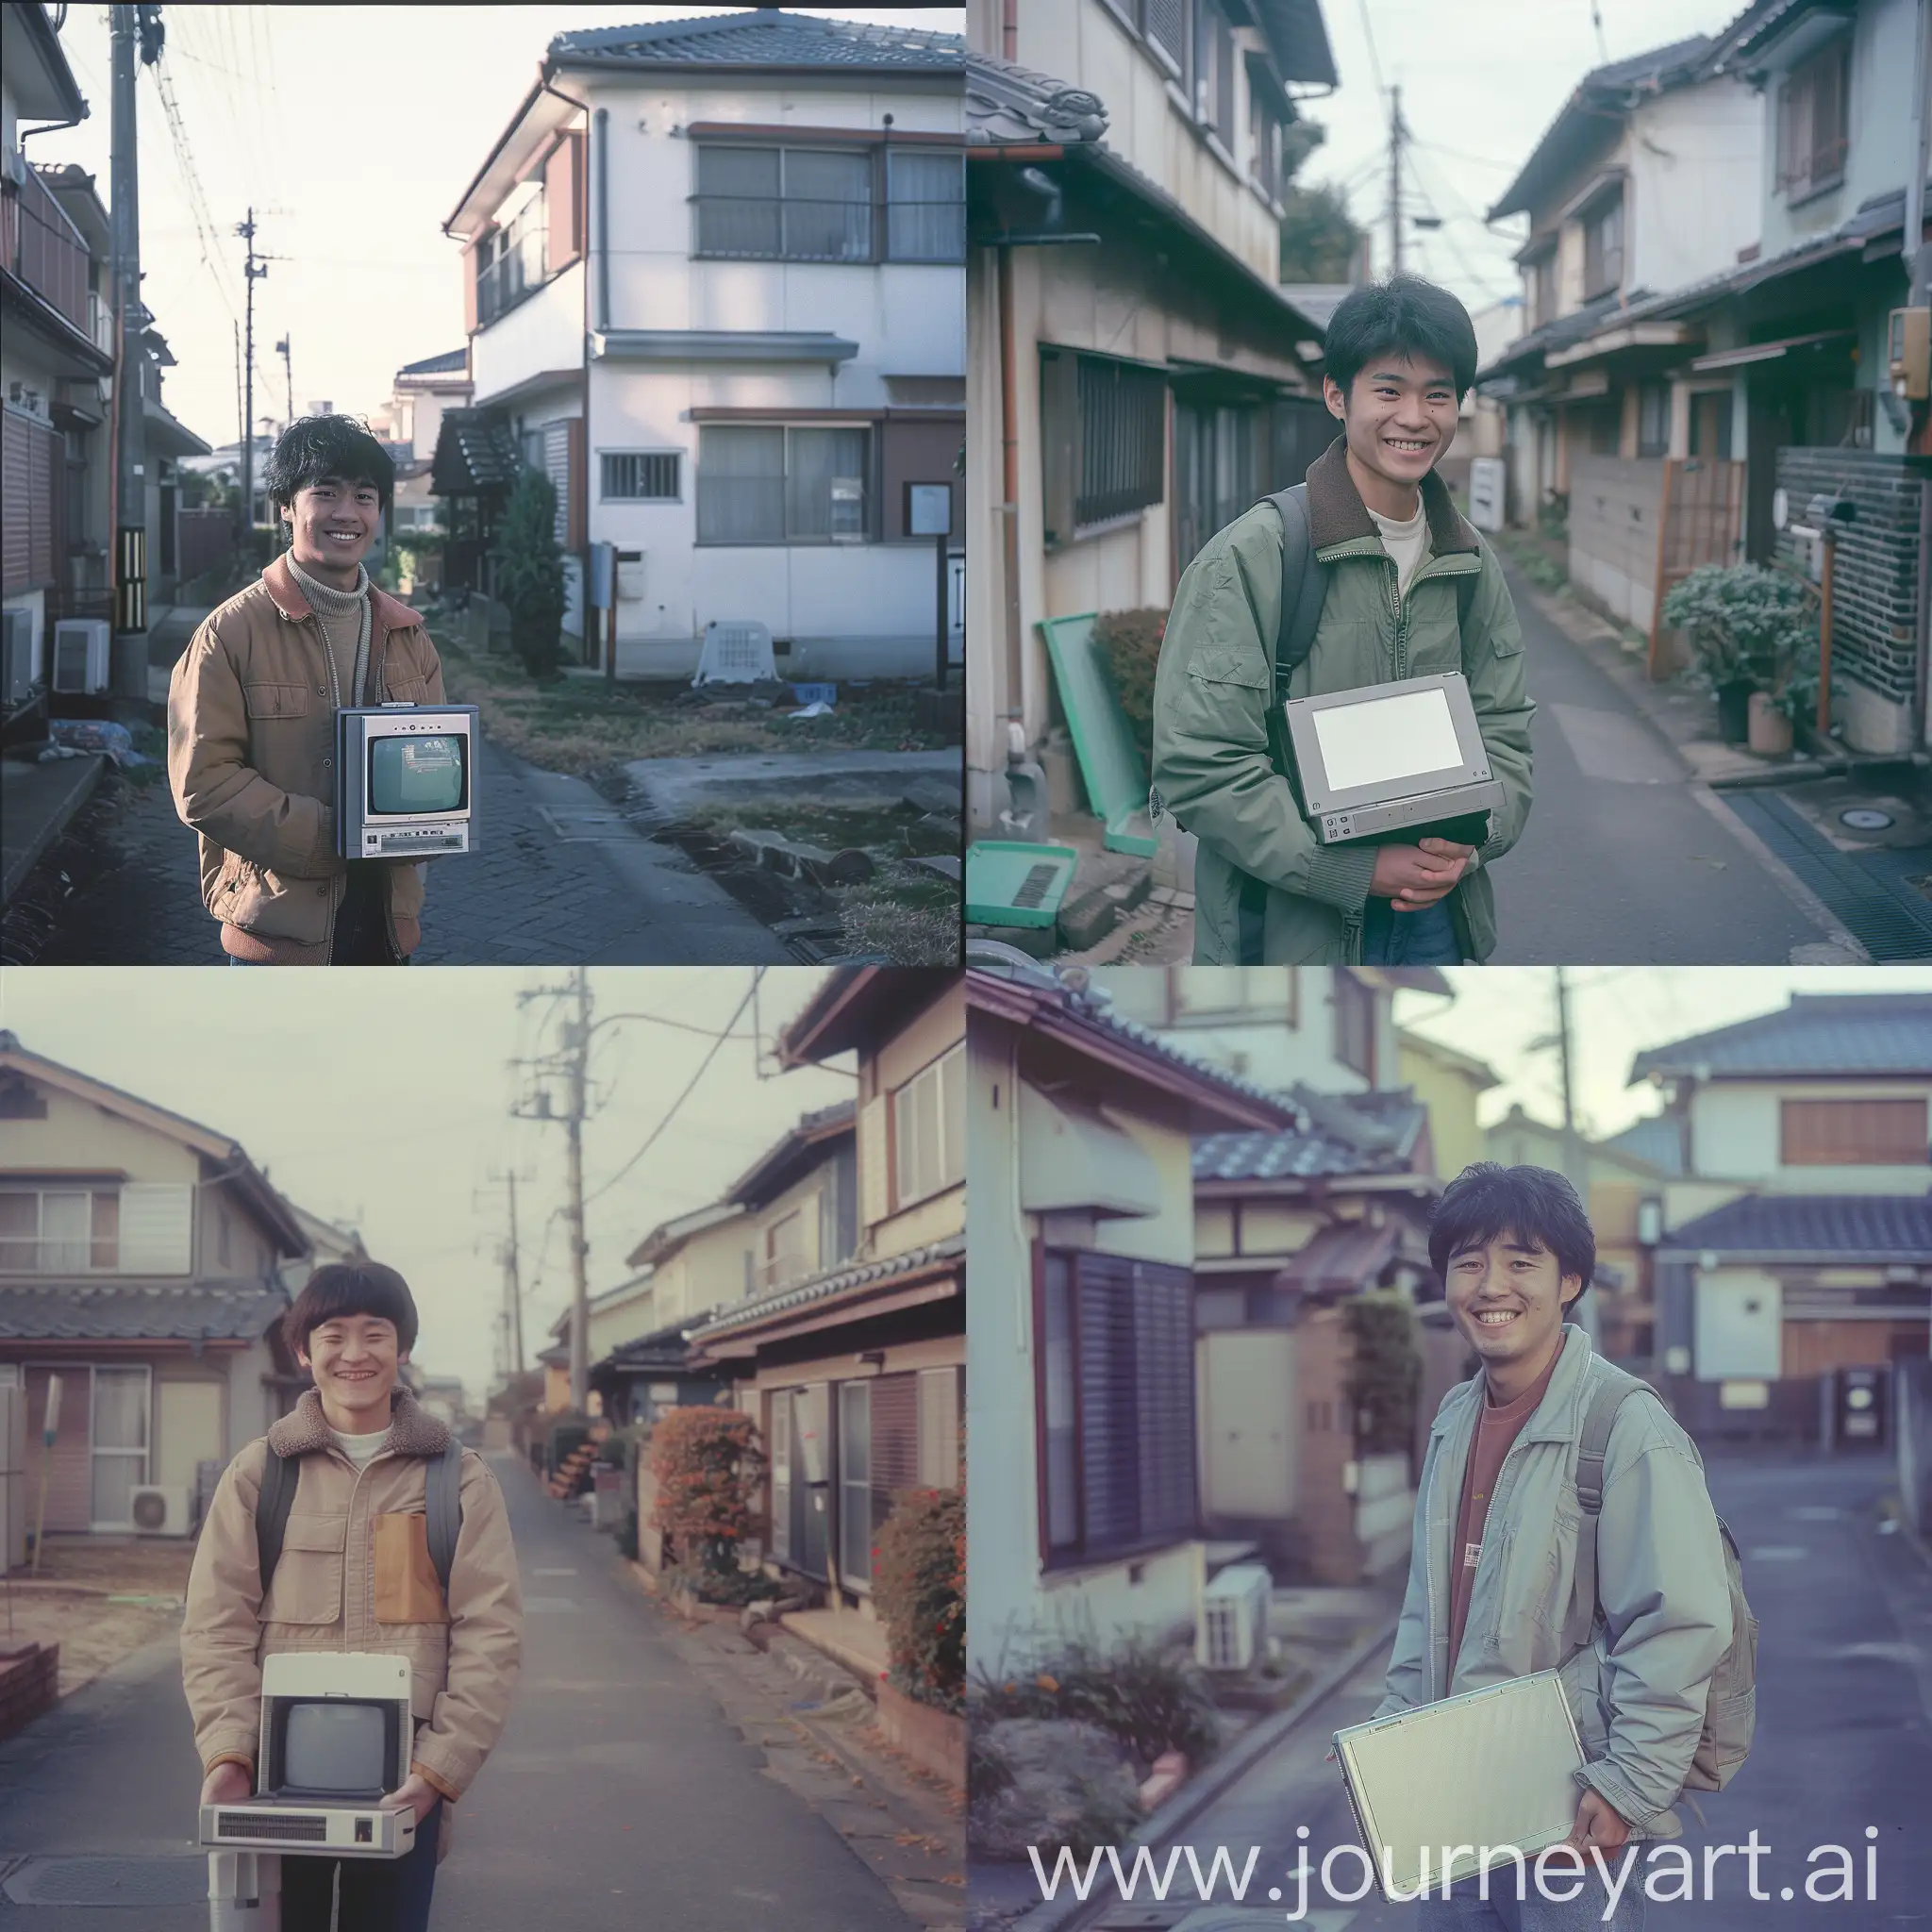 Ultra realistic. A photo taken on Canon AE-1 in mid 80s in quiet region of Tokyo. Small neat houses. Clean streets. No people. Early morning, a young man holding first portable pc and smiling.